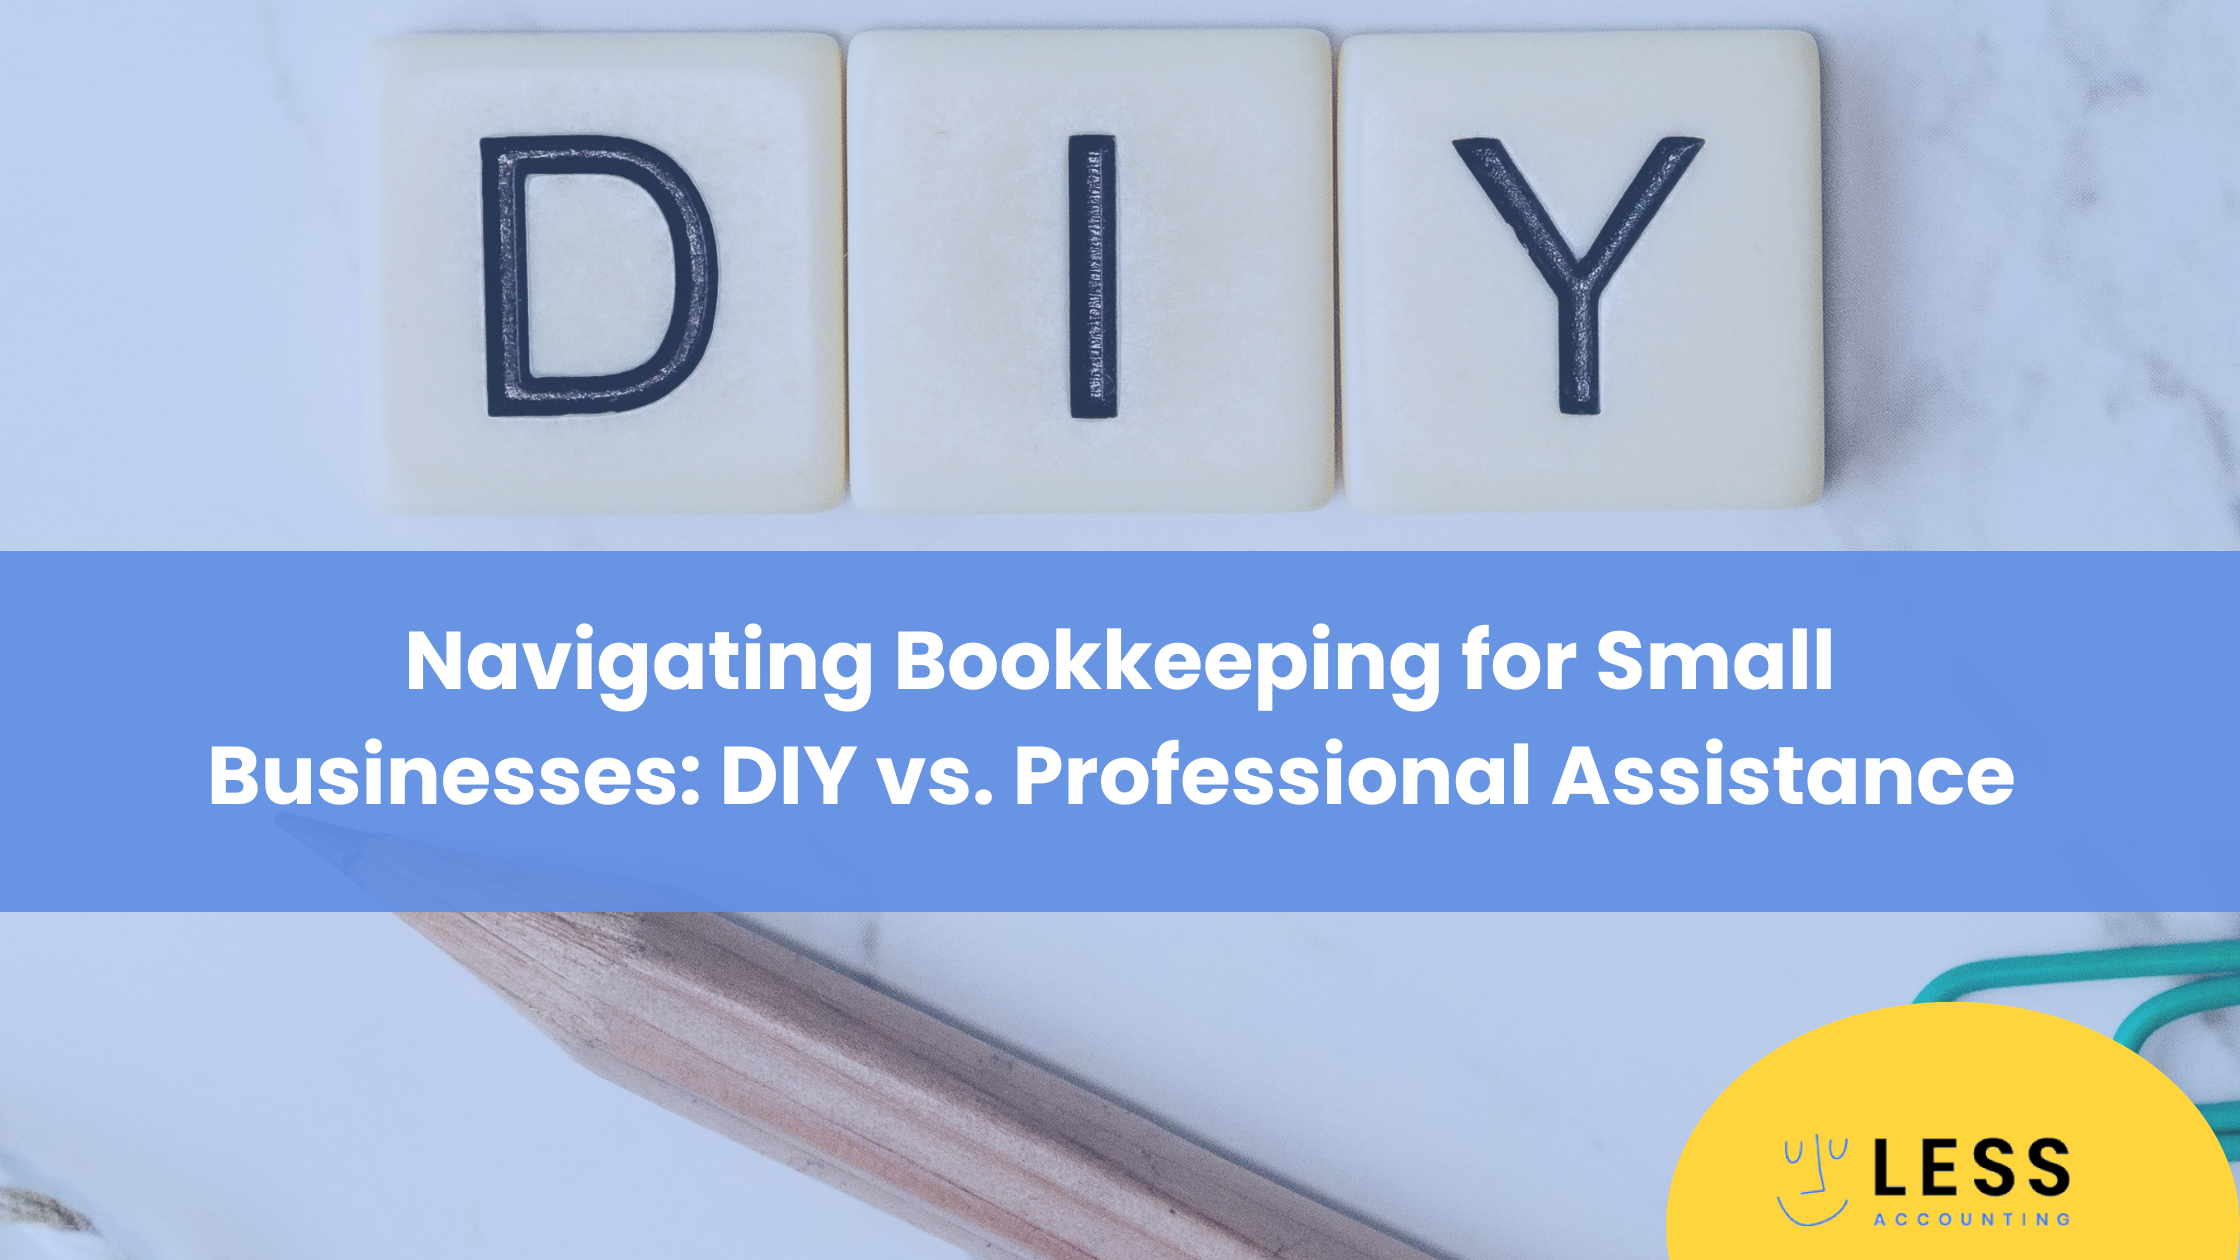 Navigating Bookkeeping for Small Businesses: DIY vs. Professional Assistance